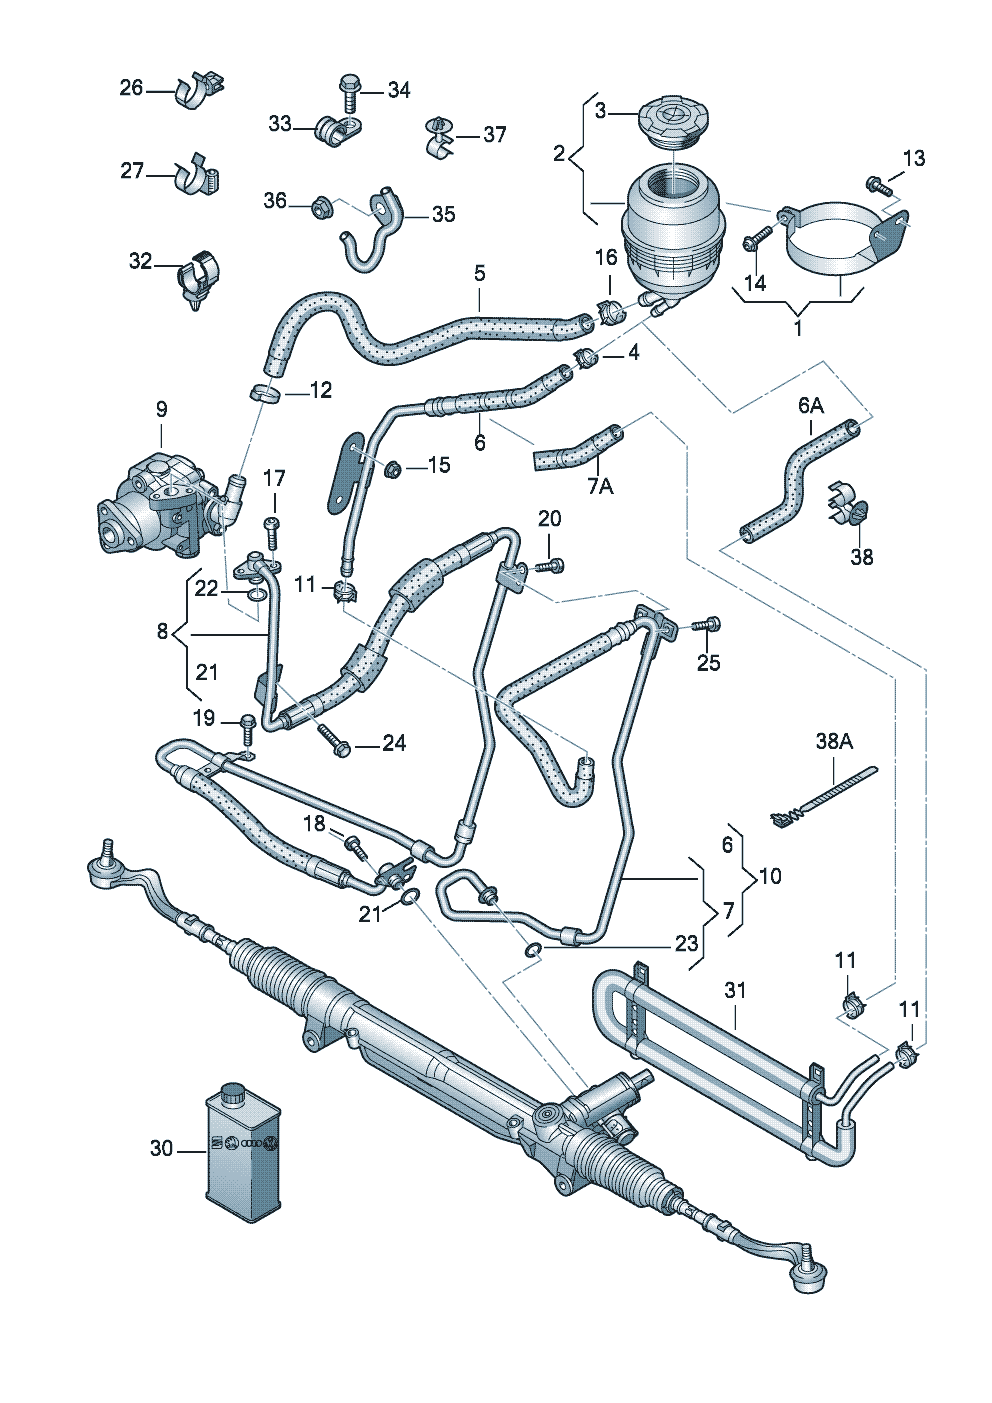 oil container and connection<br>parts, hoses  - Audi Q5/Sportback - aq5